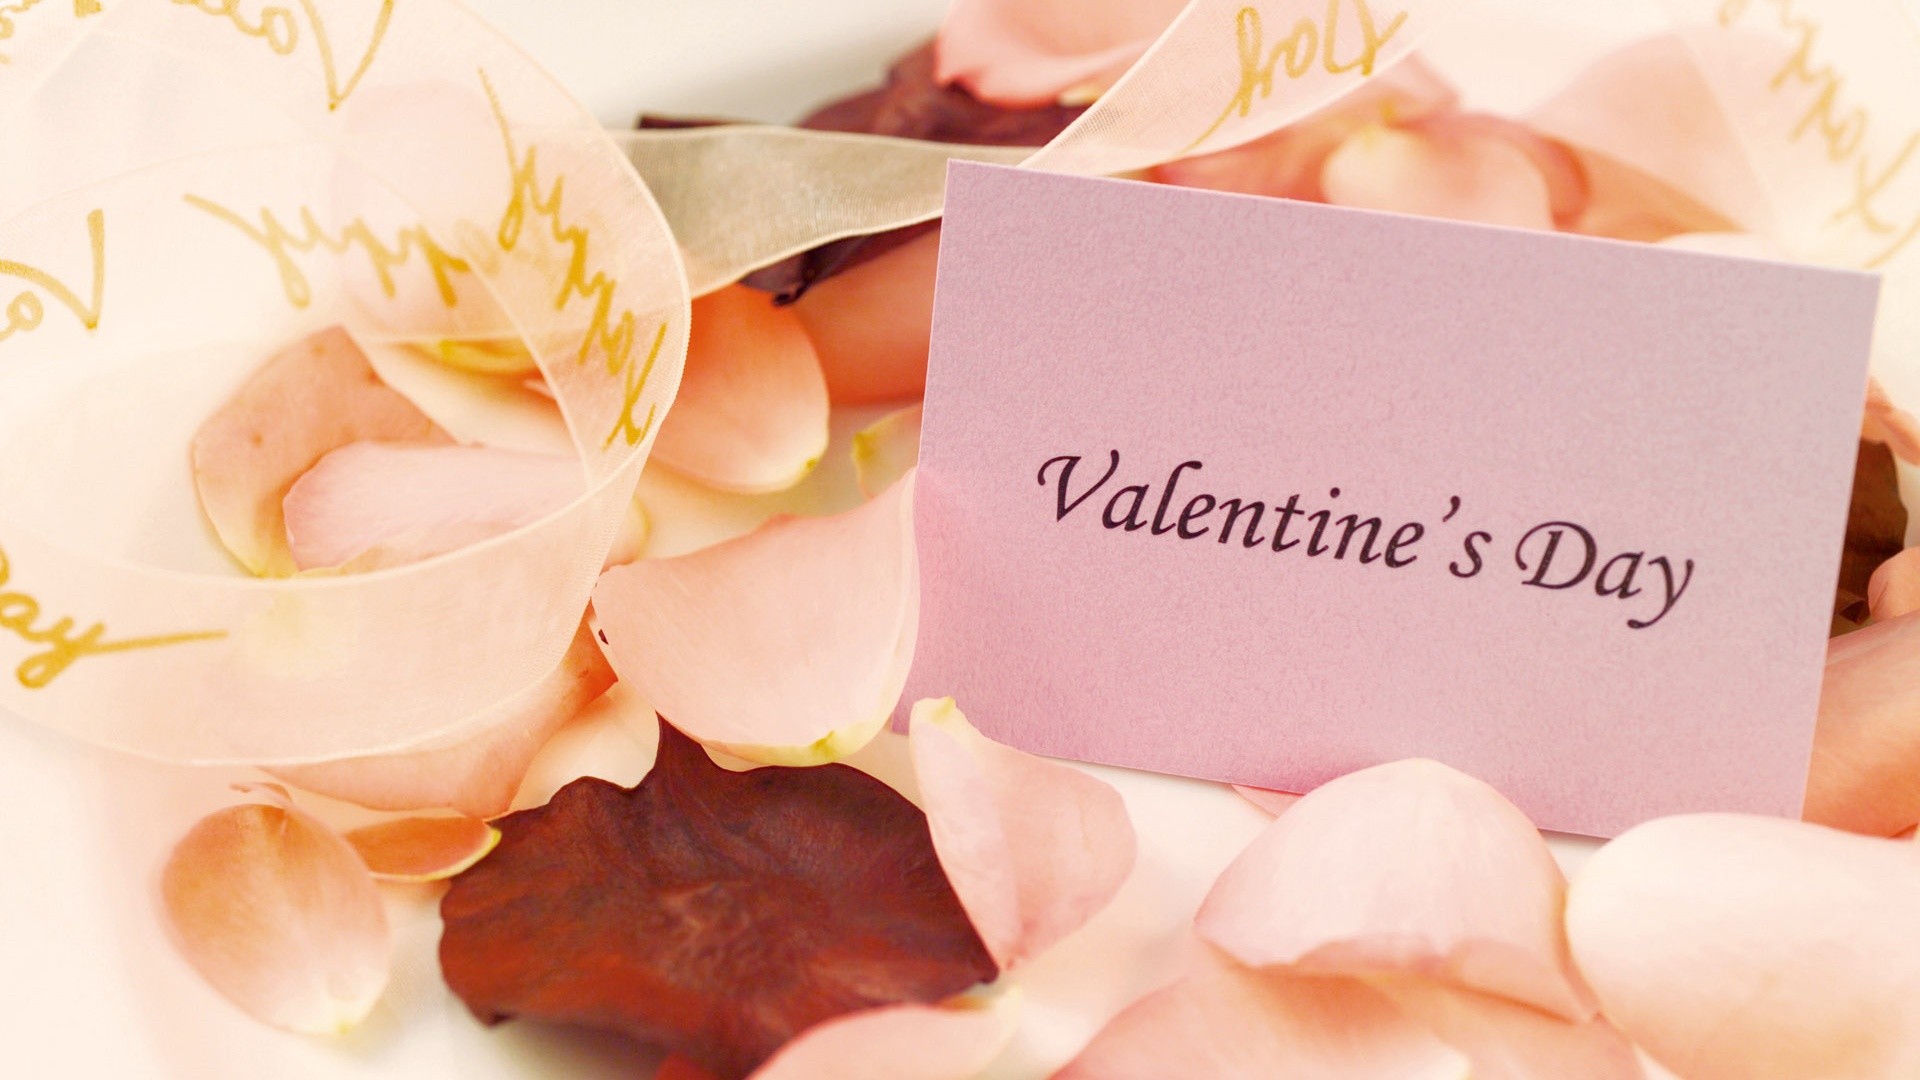 10 Best Valentine's Day PC Wallpapers to Make the Mood Romantic - Techicy